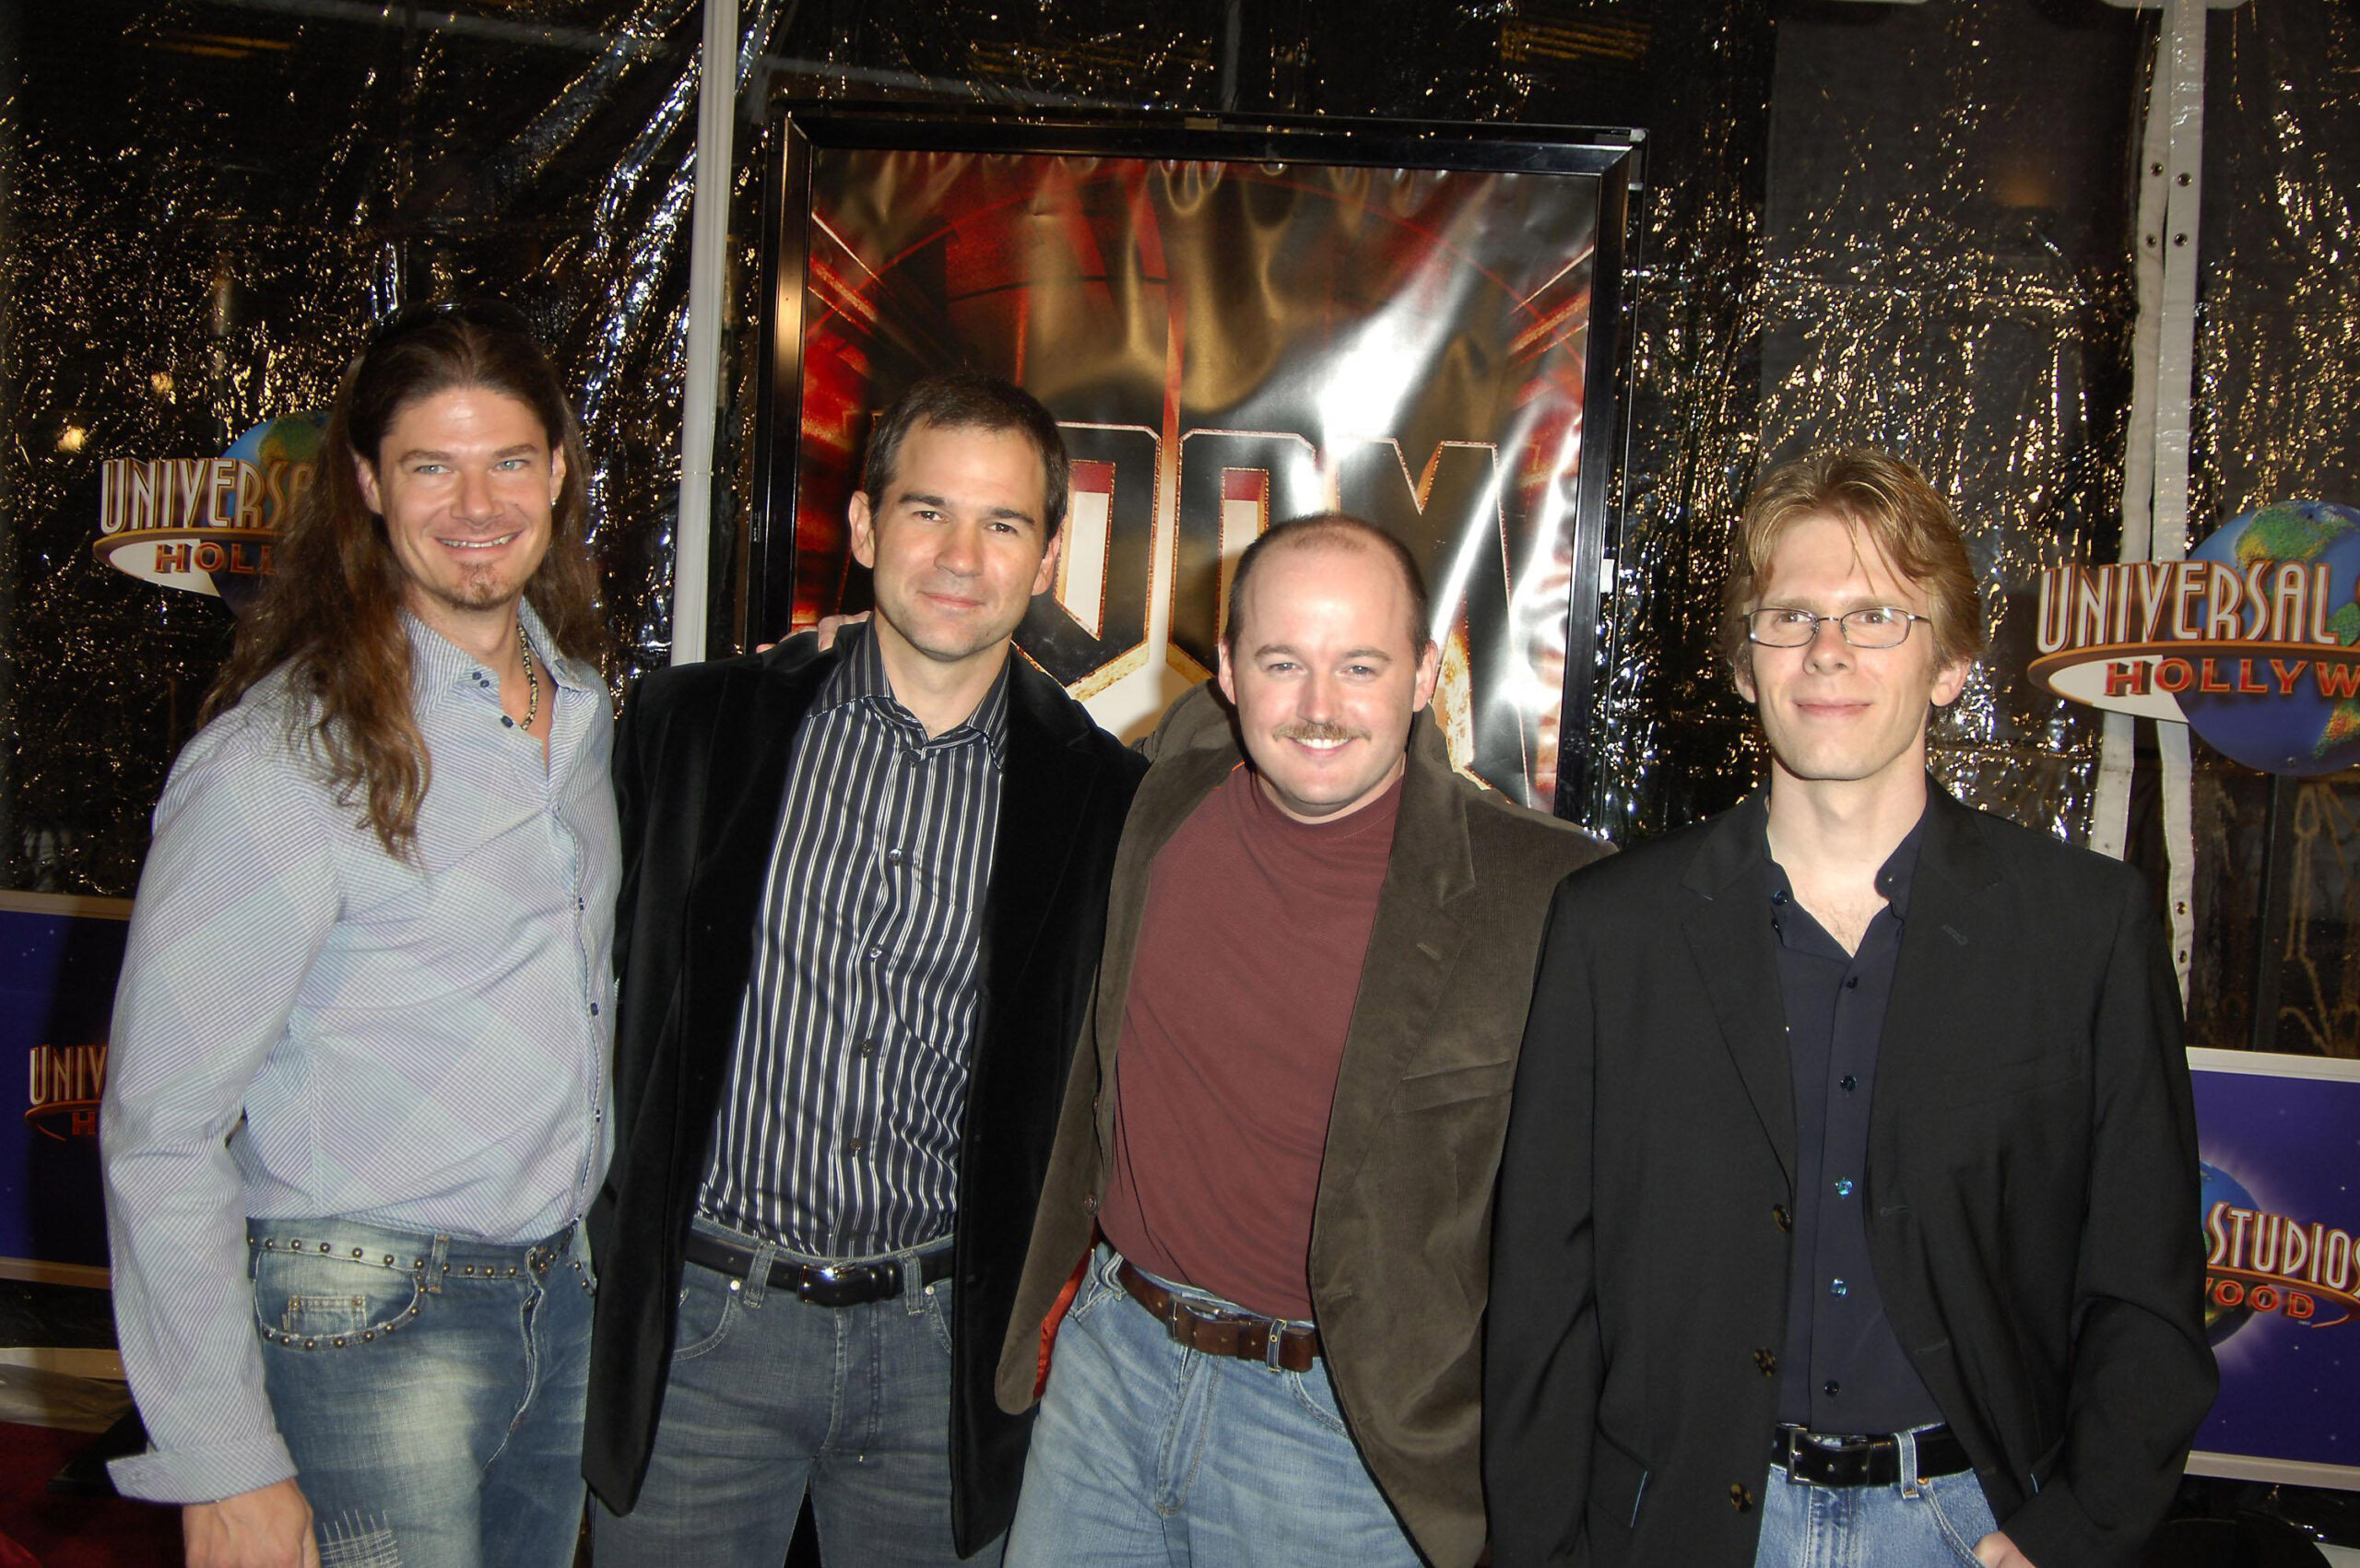 John Carmack, right, with Todd Hollenshead, Kevin Cloud, and Tim Willets at the DOOM Premiere at Universal Studios Cinema in LA in 2005. [Image: Shutterstock]